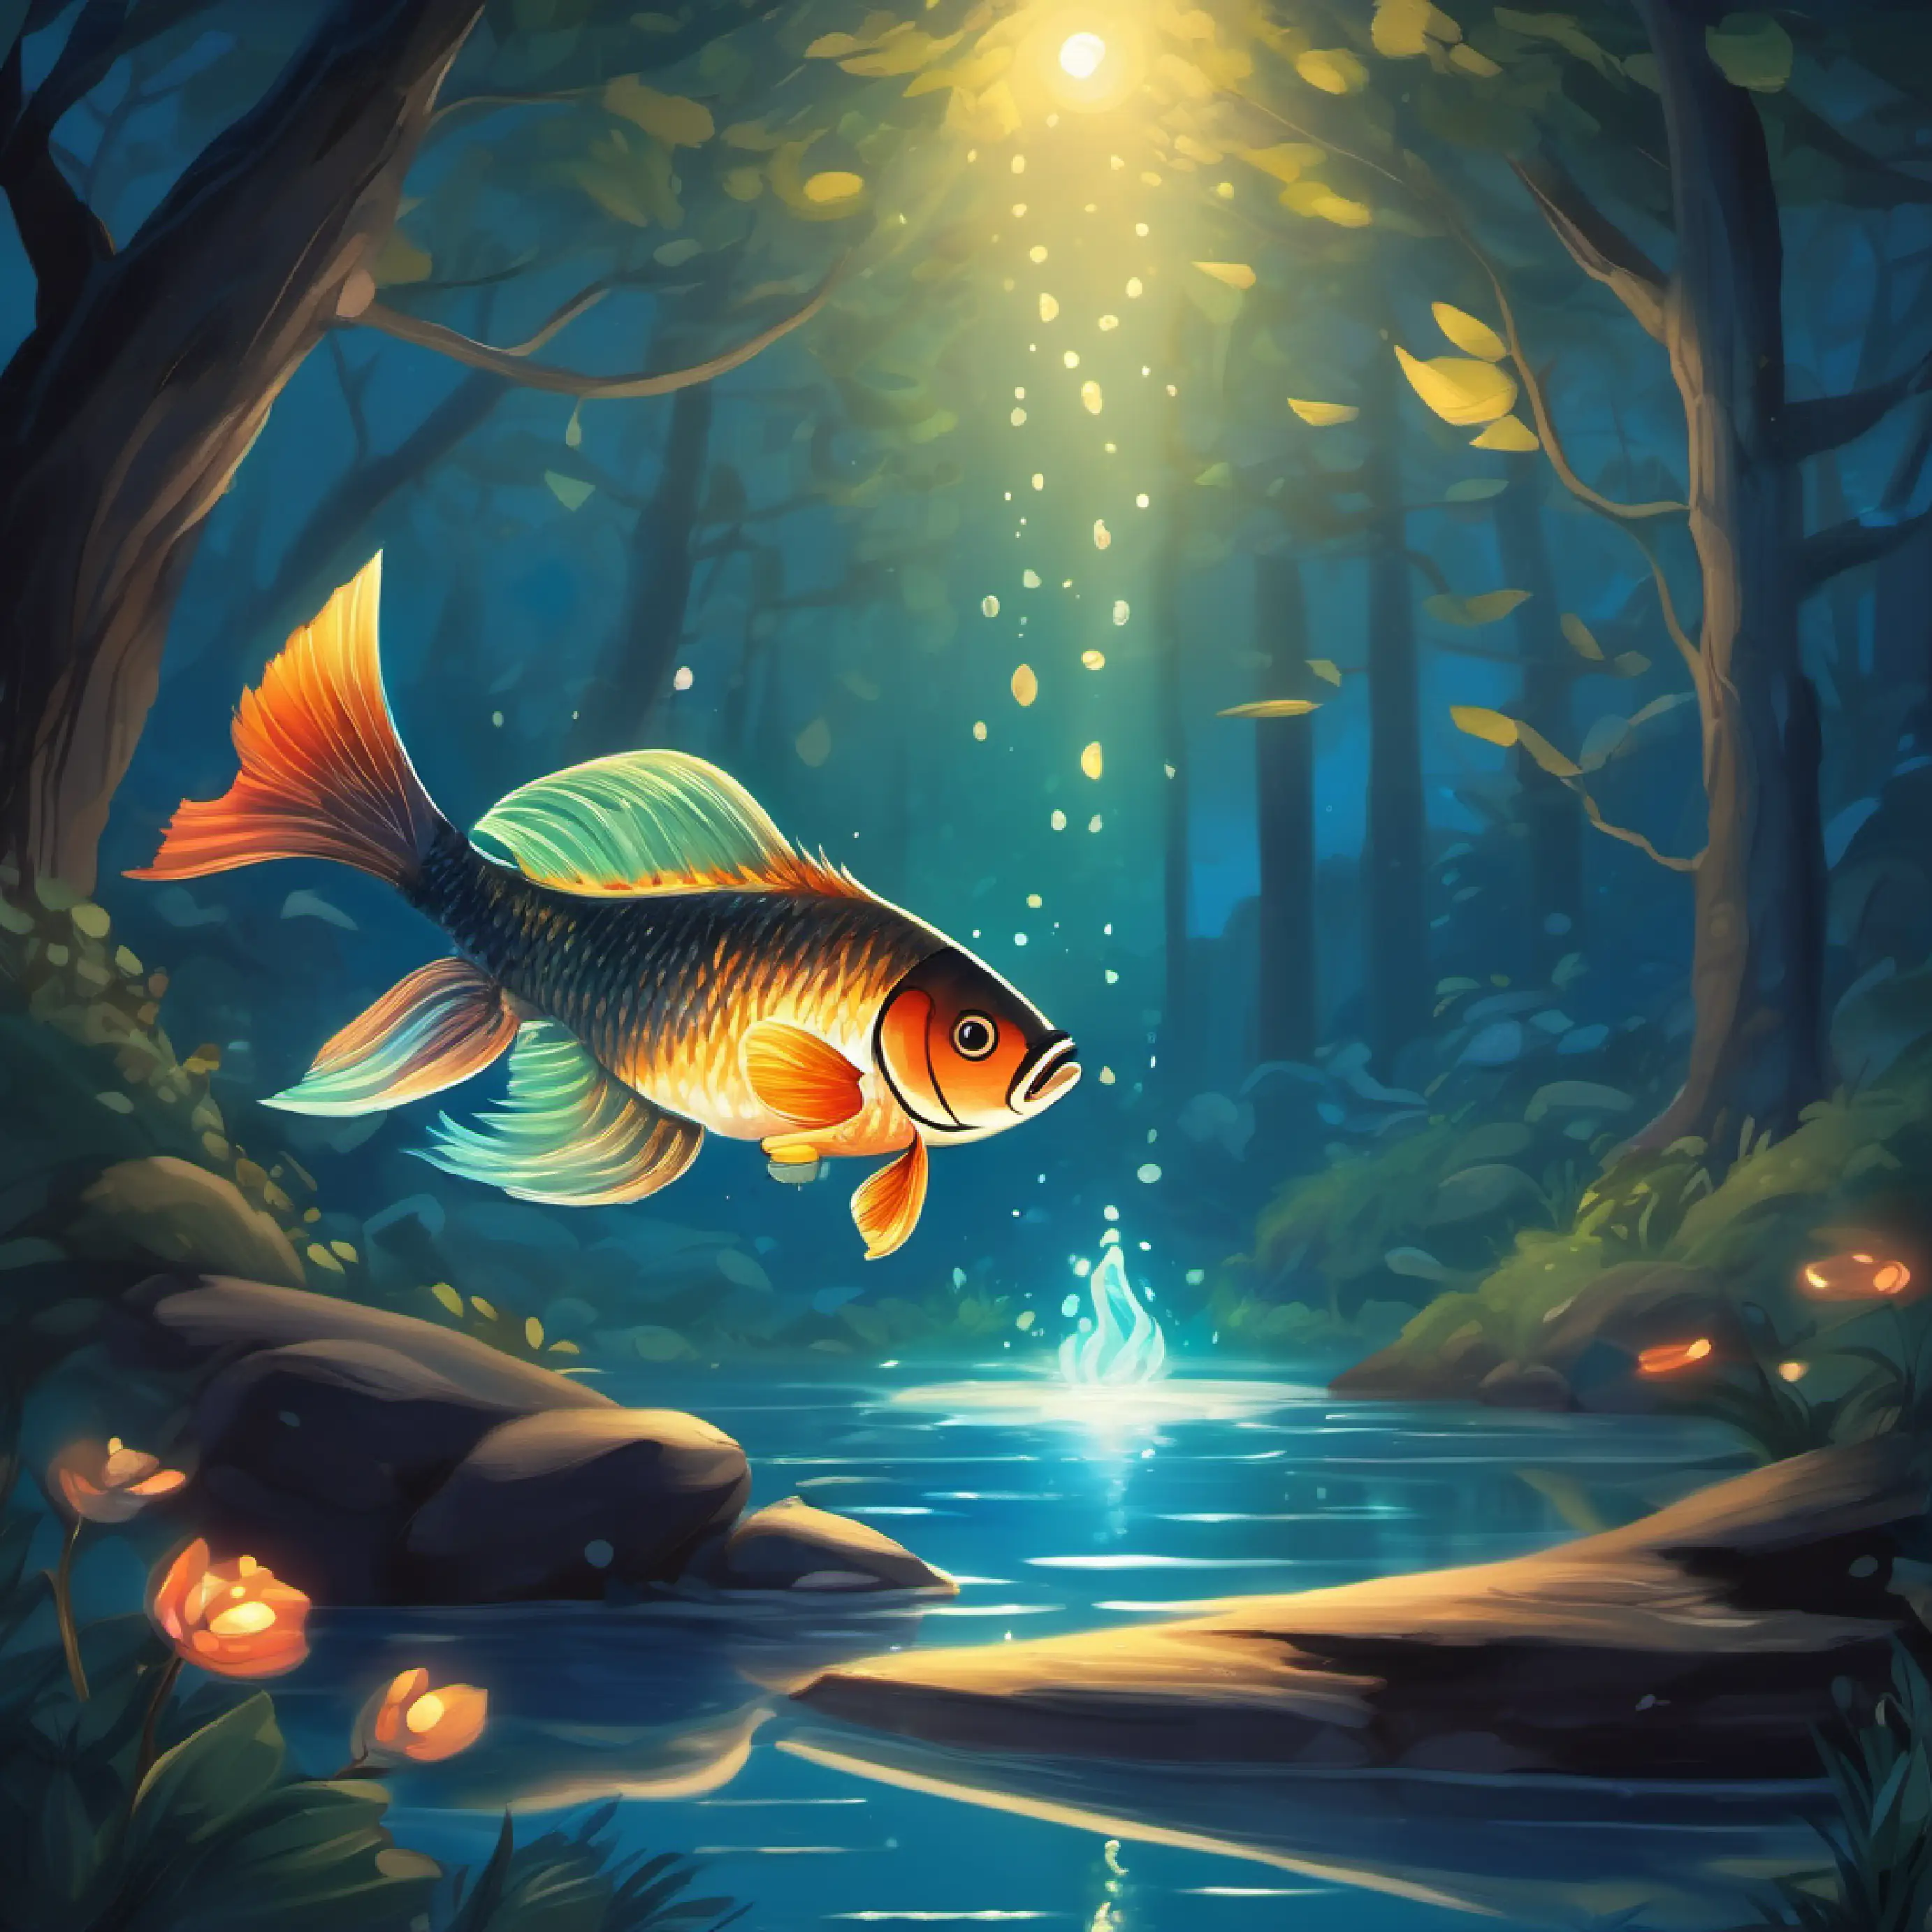 Night time in the woods, second riddle from Fish, silver scales, swift, happy, a water breather the fish